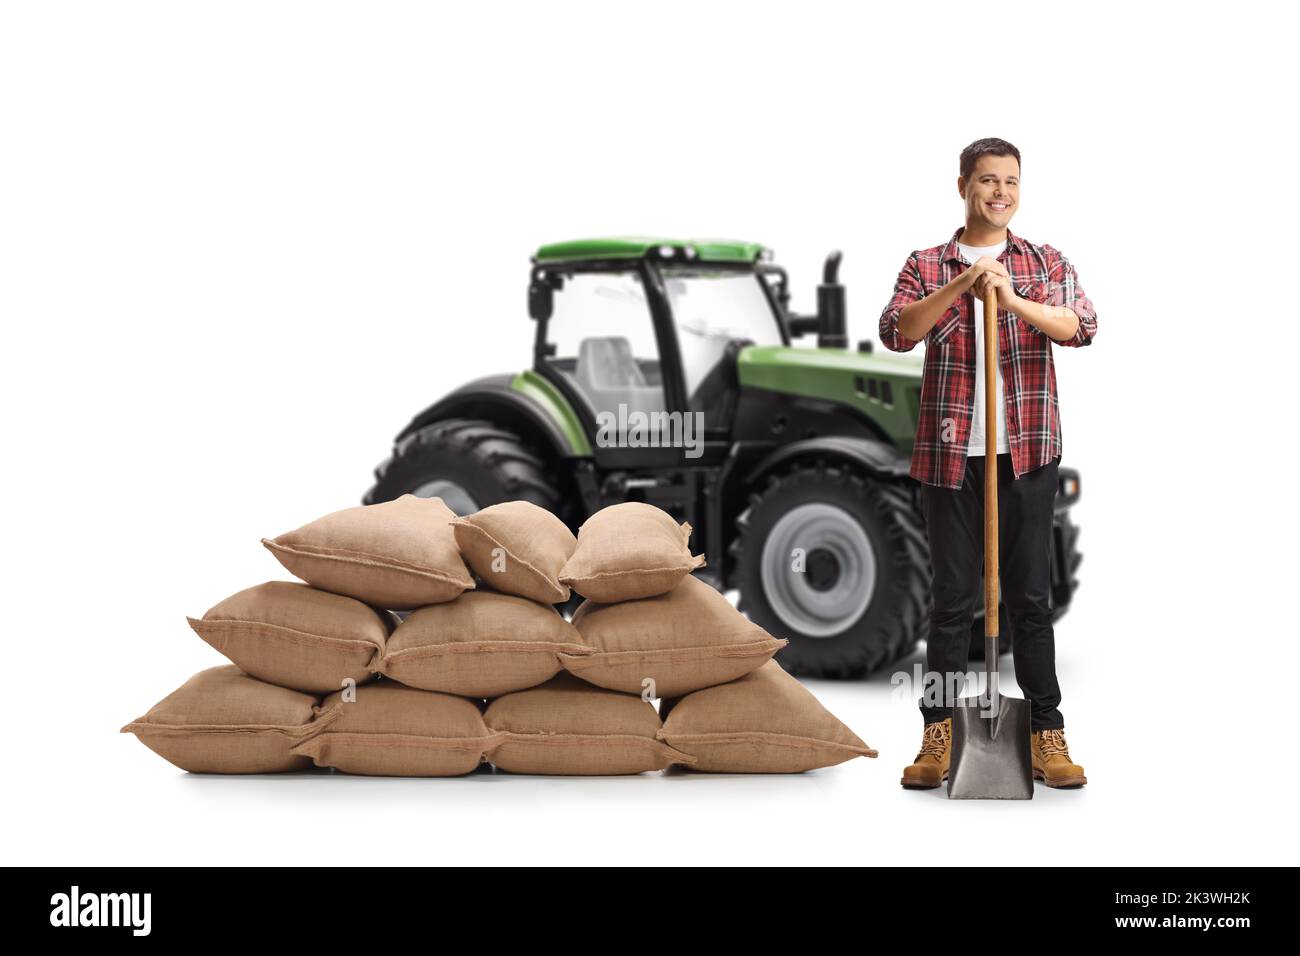 Full length portrait of a male farmer with a shovel standing in front of a tractor isolated on a white background Stock Photo